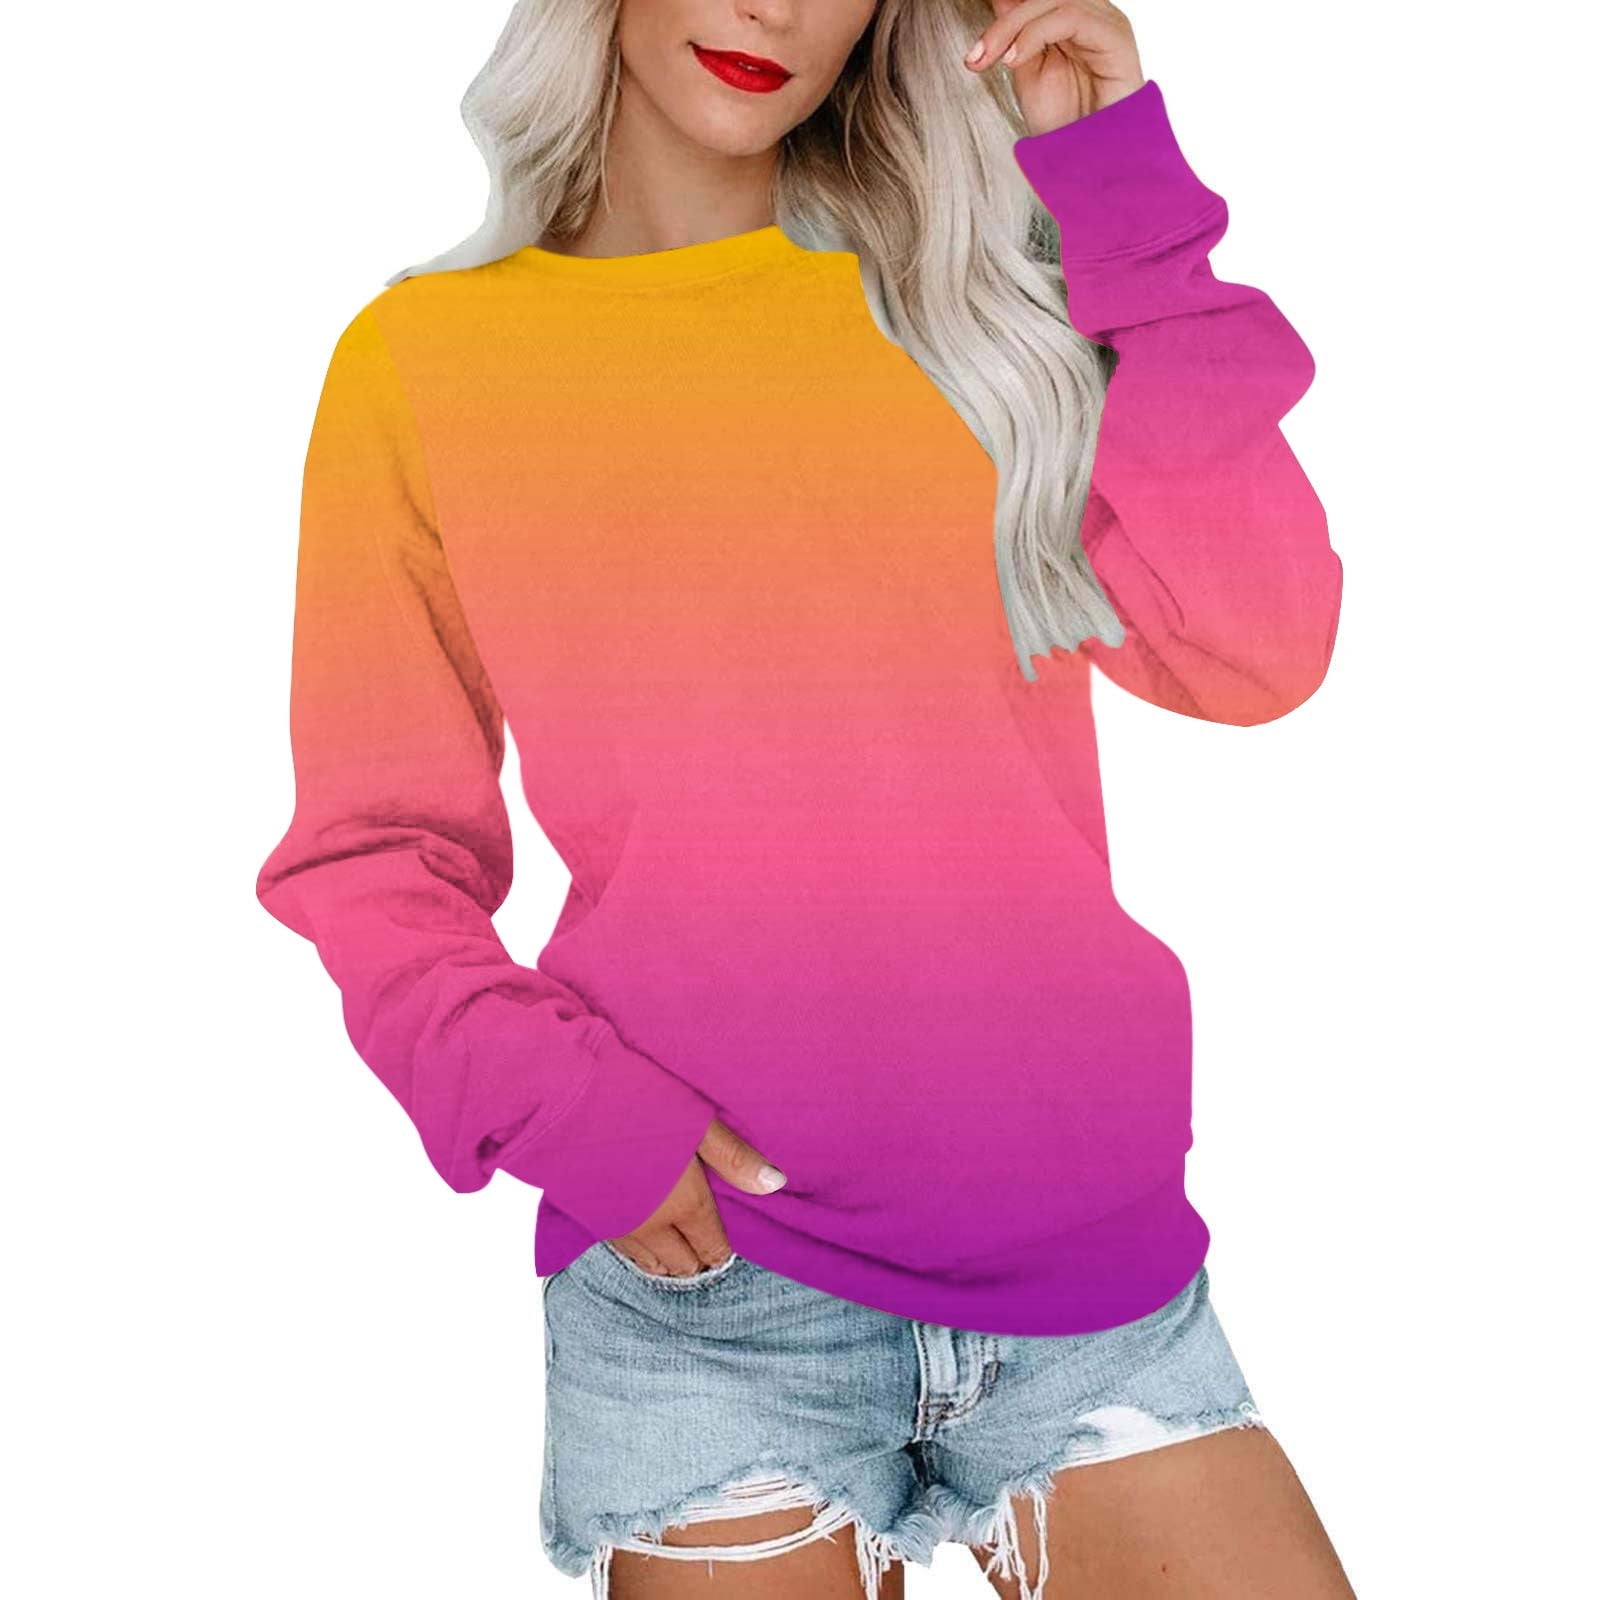 overstock items clearance all prime,Womens Oversized Sweatshirts Pullover  Casual Crewneck Long Sleeve Tops Comfy,Womens Casual Tops Loose Fit 